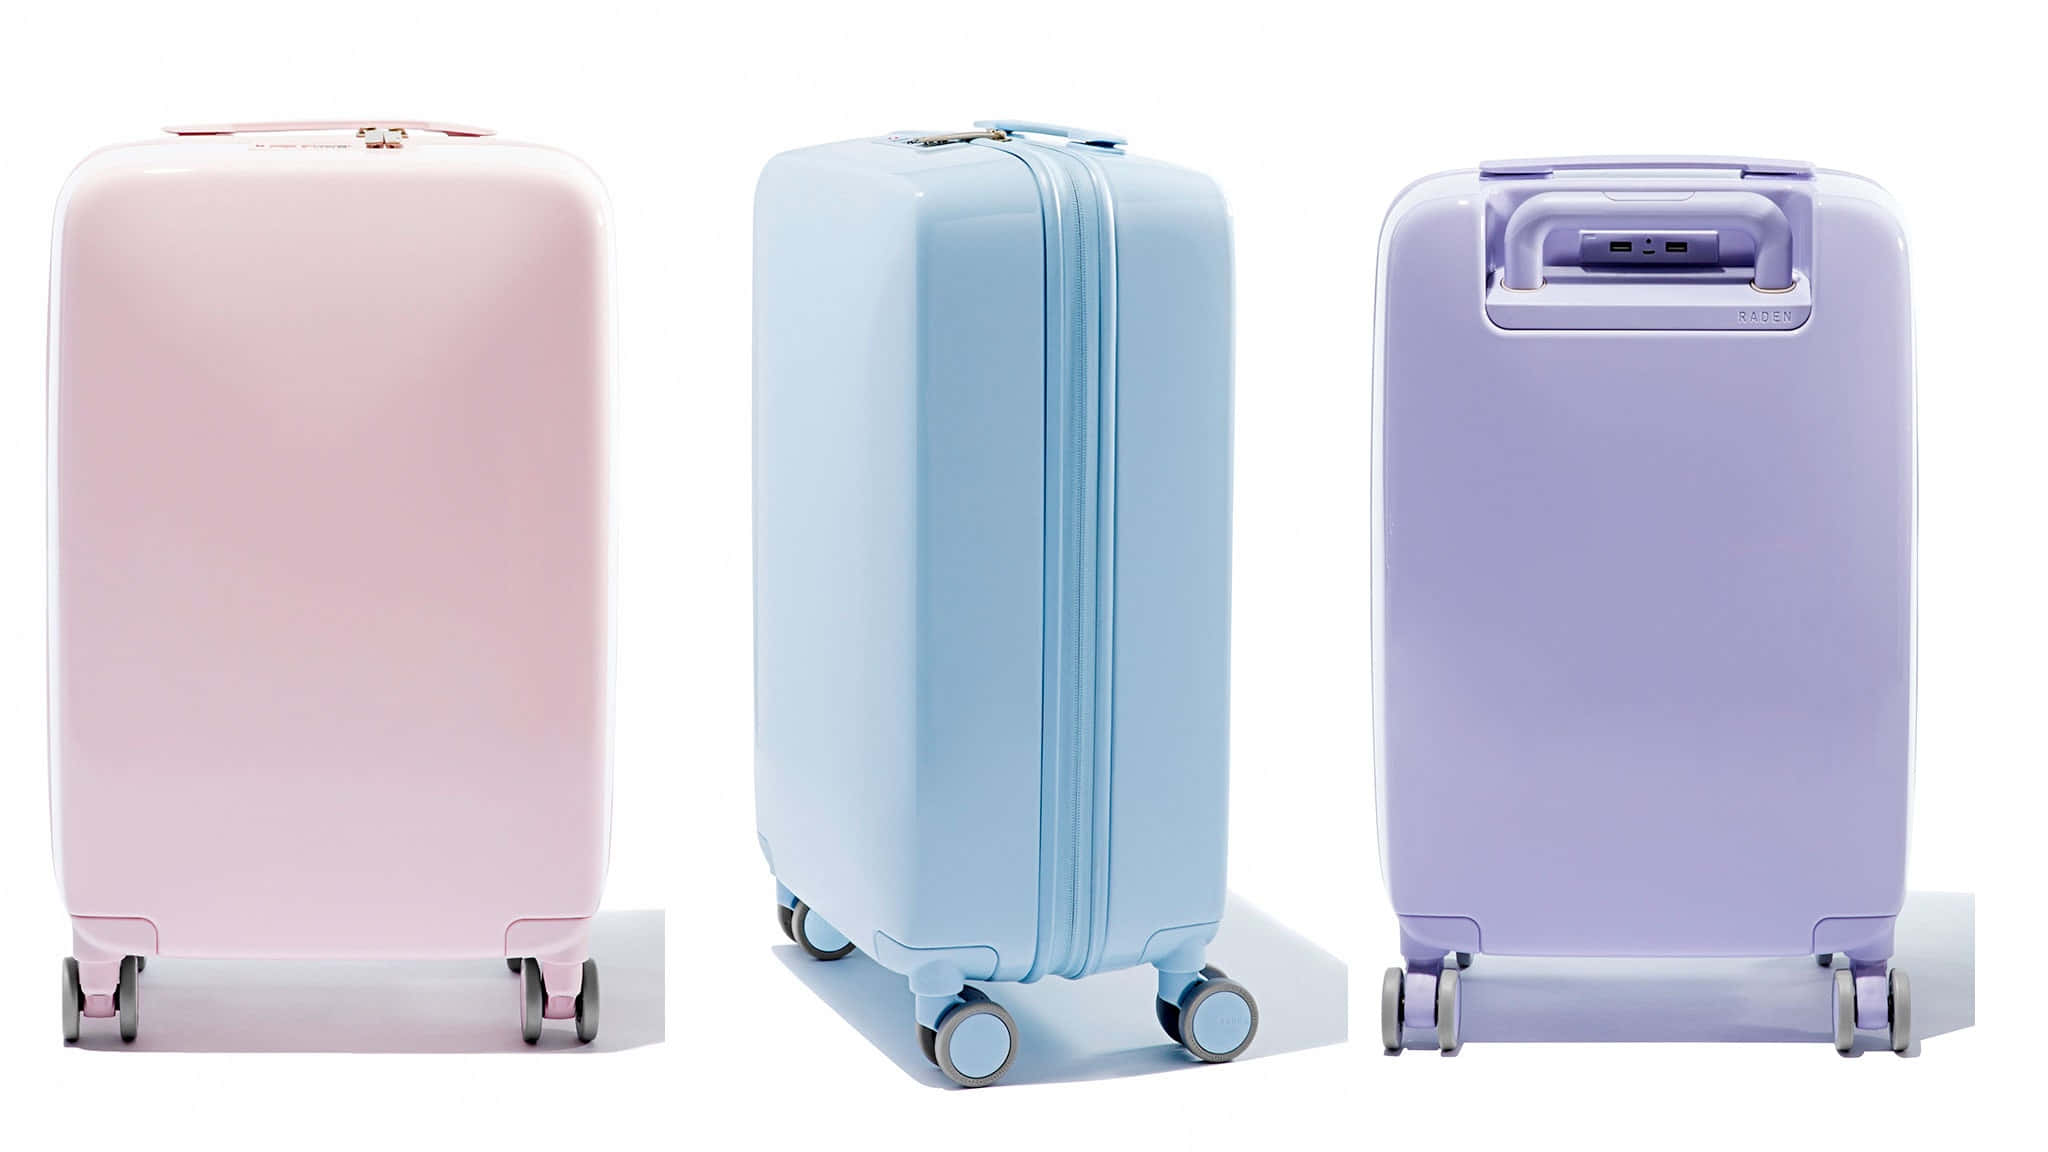 Ready to explore the world with a distinctive purple luggage Wallpaper